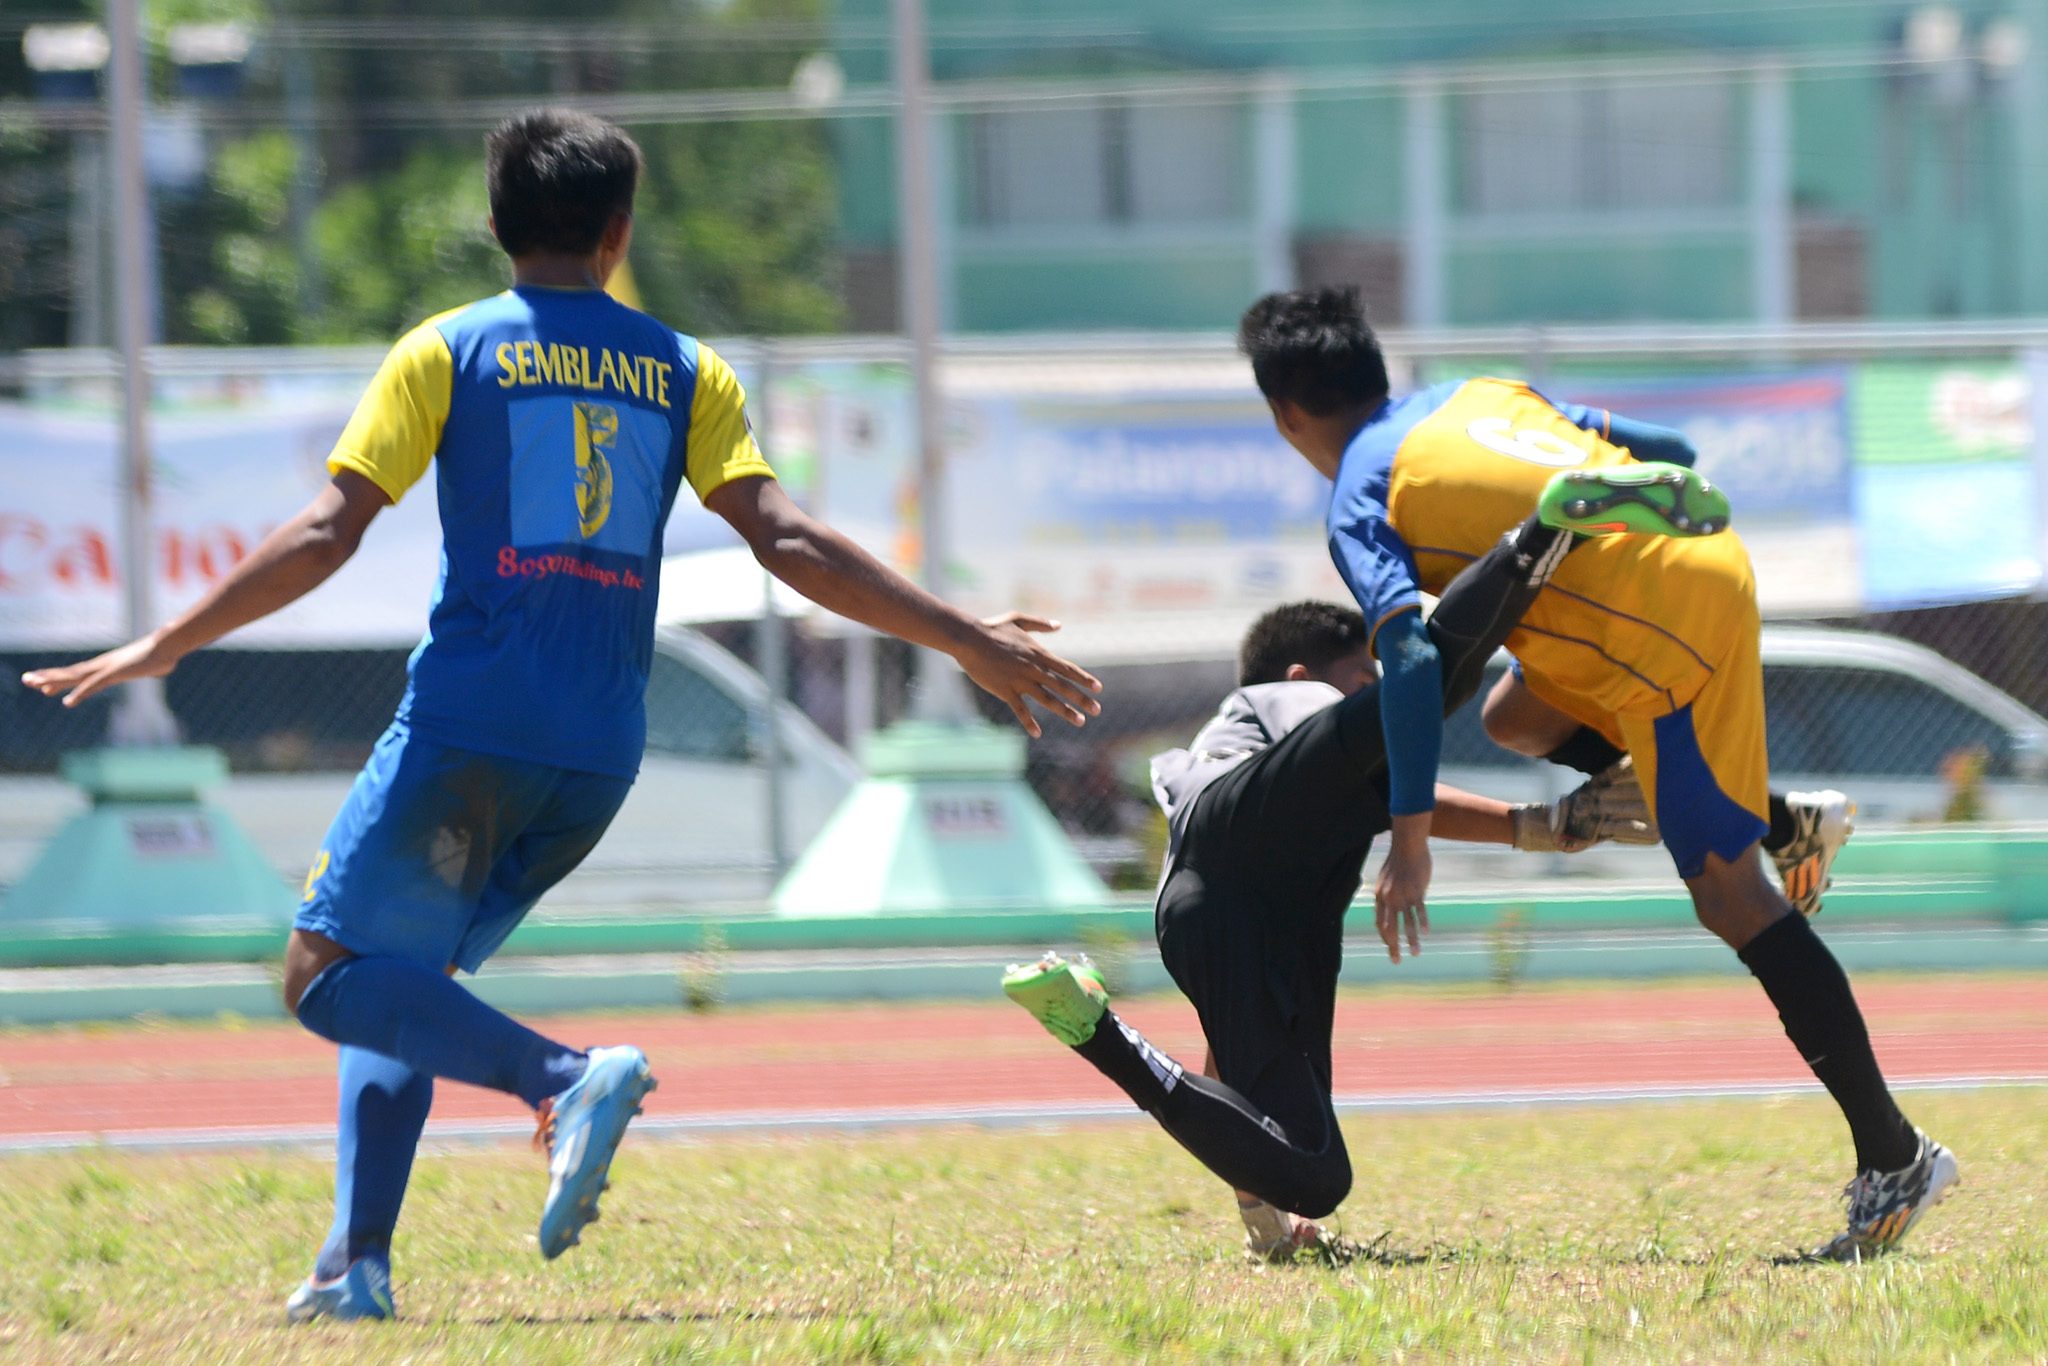 DOWN THEY GO. NCR and Central Visayas players get entangled in a play. Photo by Roy Secretario/Rappler 